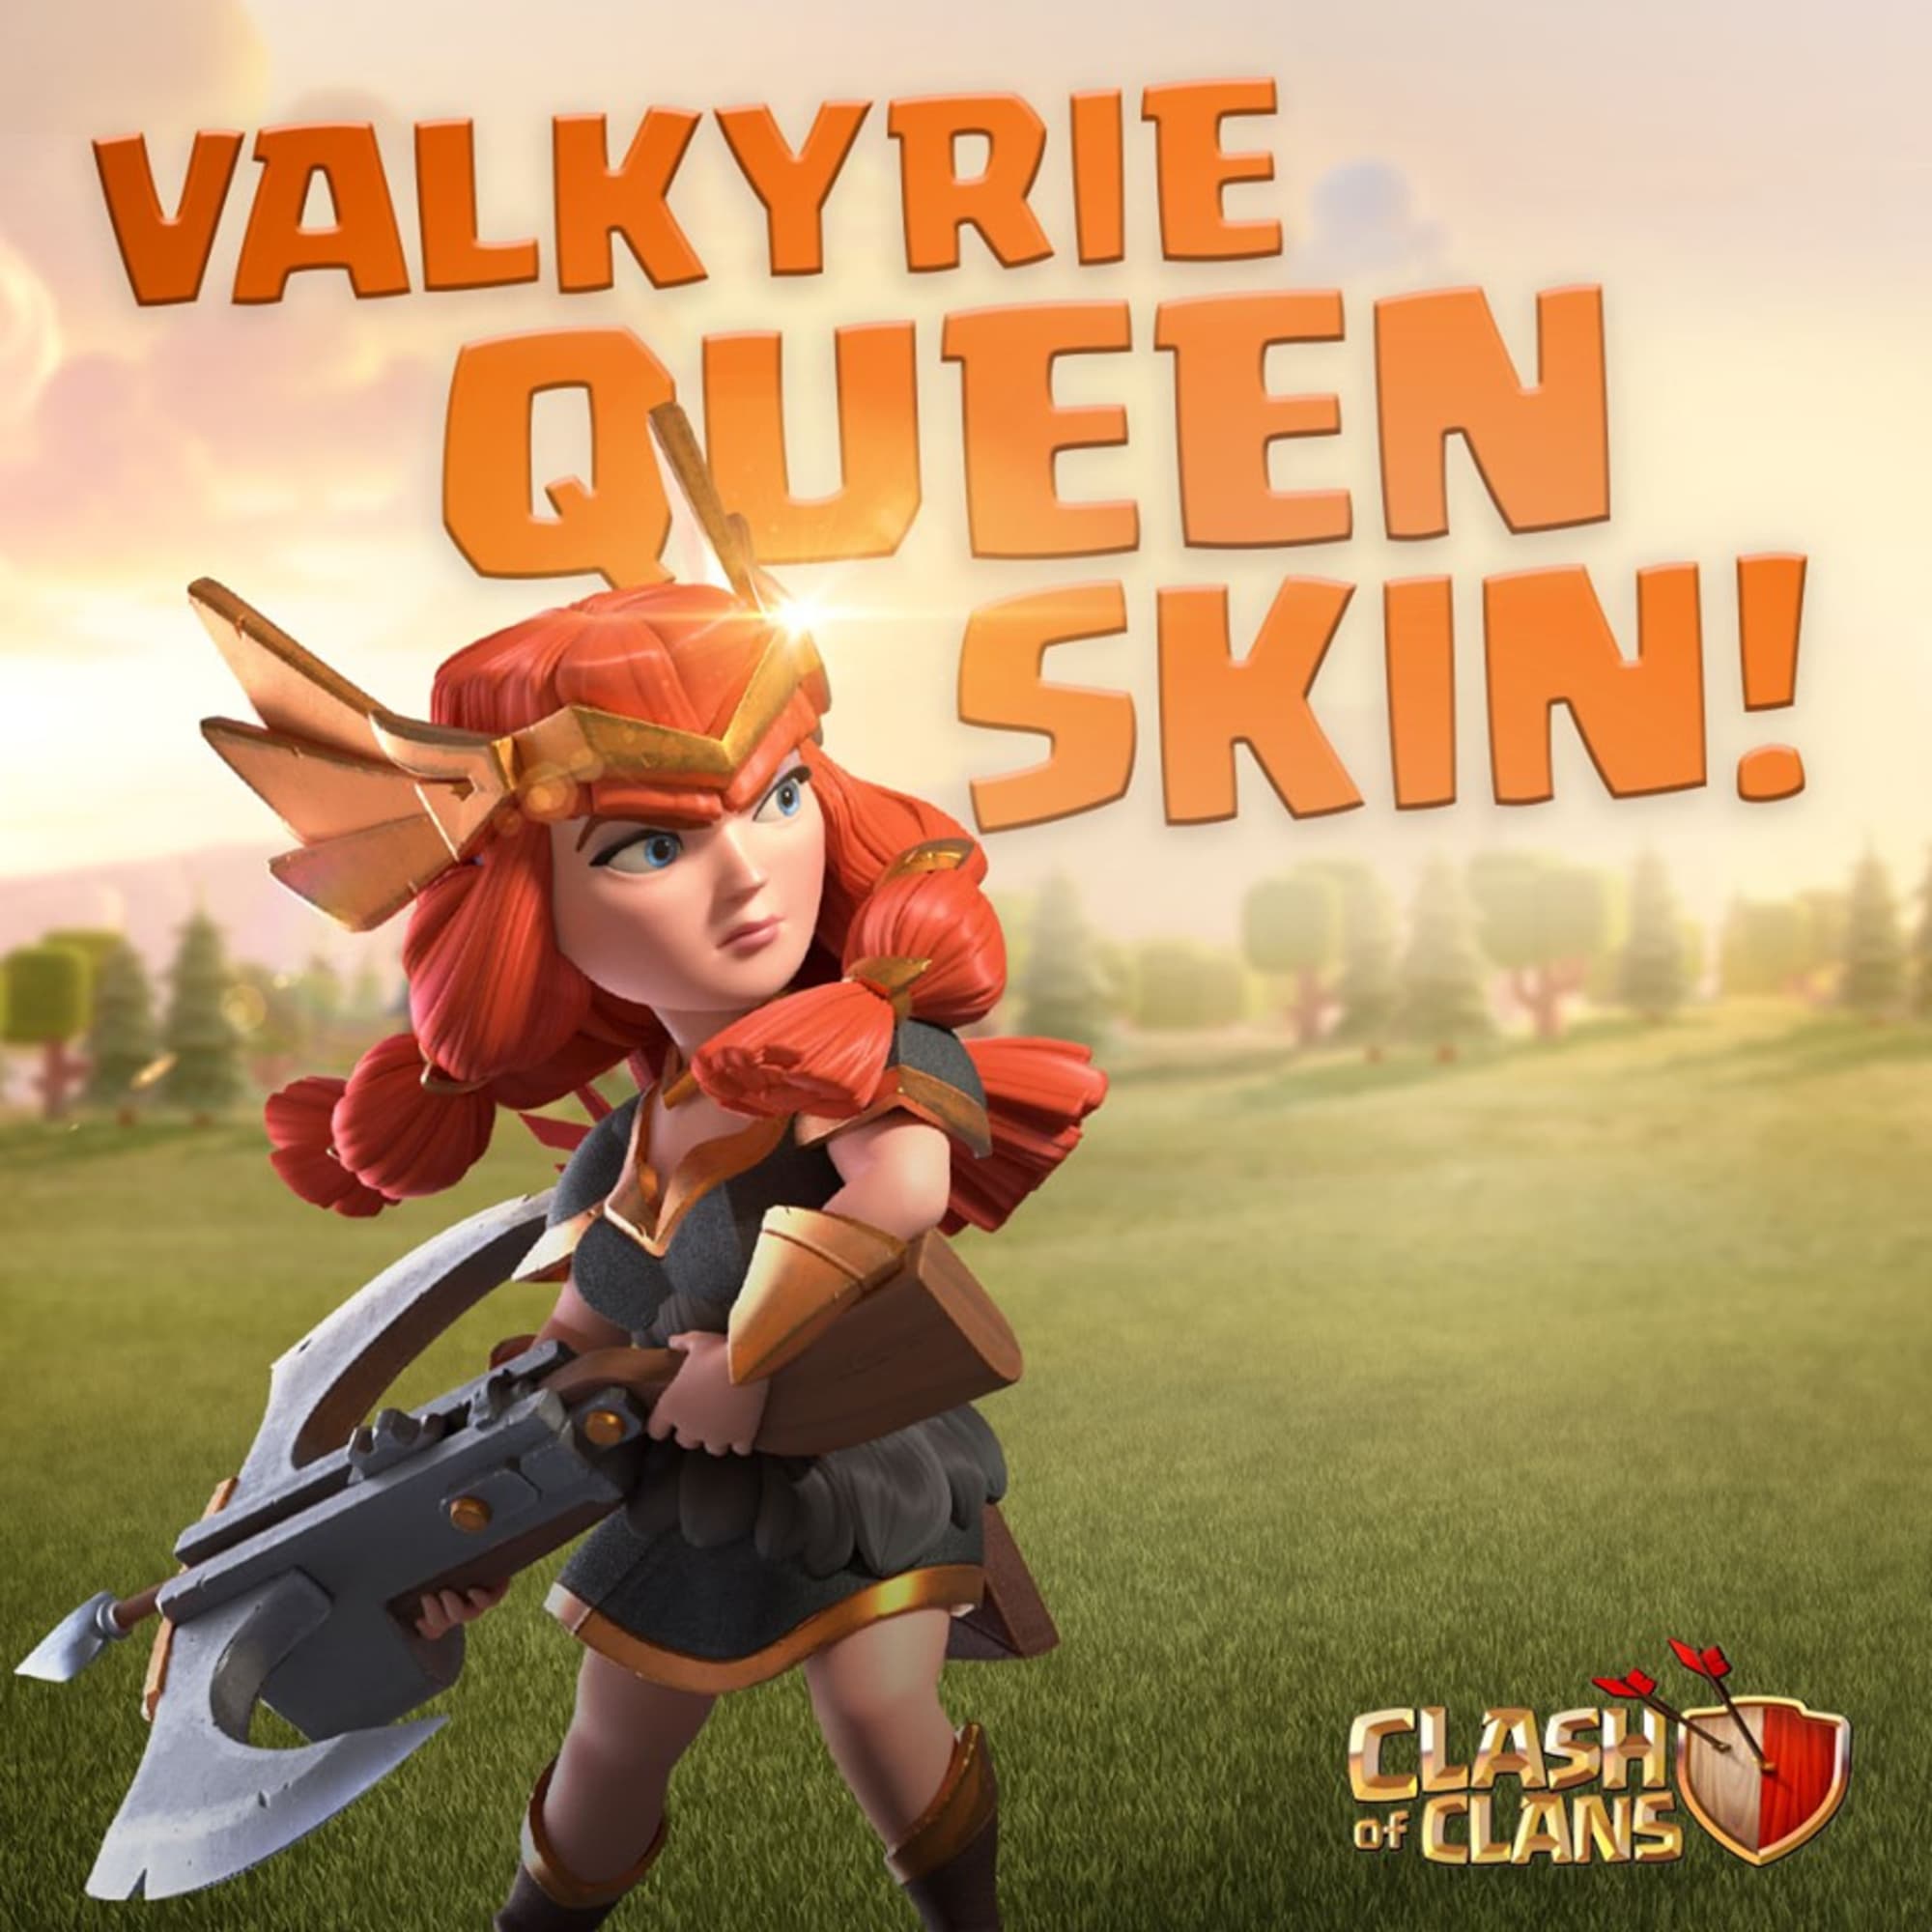 Clash of Clans July Season Challenges live with Valkyrie Queen reward.